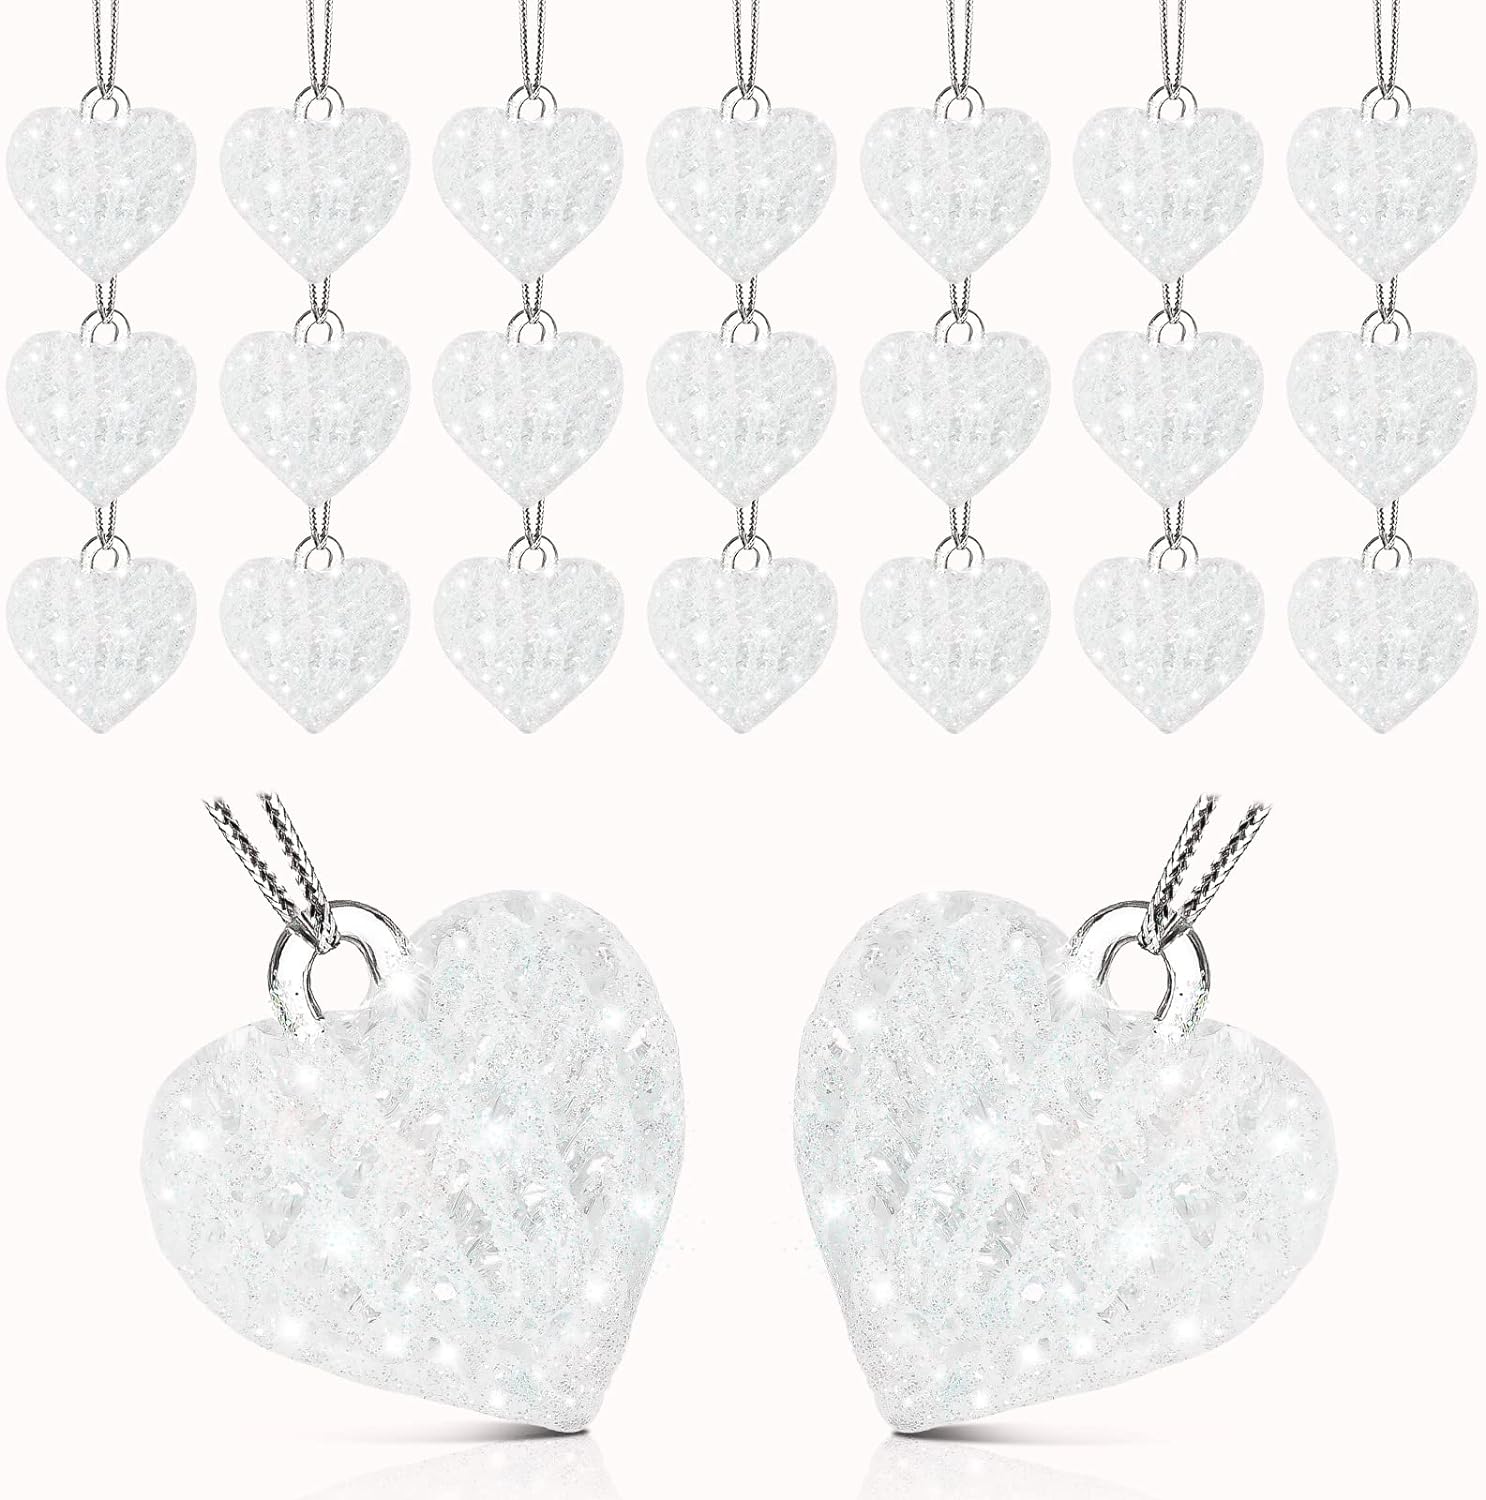 21 Pieces Valentine' Day Glass Heart Ornaments Clear Heart Hanging Glass Decorations Crystal Heart Ornaments Small Heart Shaped Glass Ornaments for Valentine' Day Decor (White)